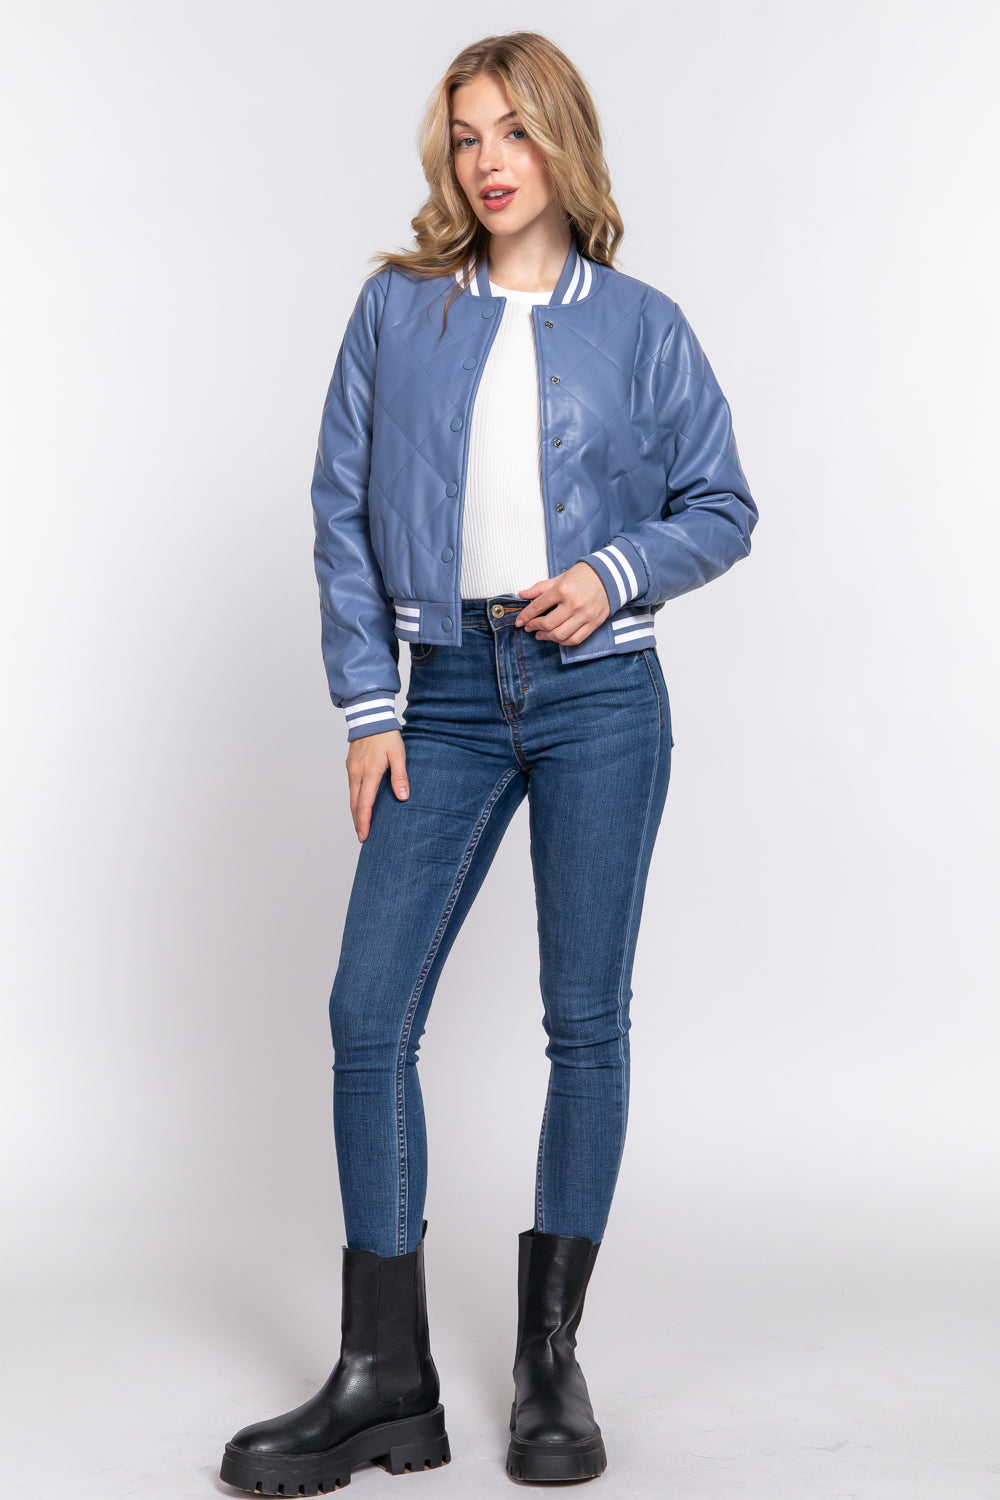 LONG SLV QUILTED PU BOMBER JACKET